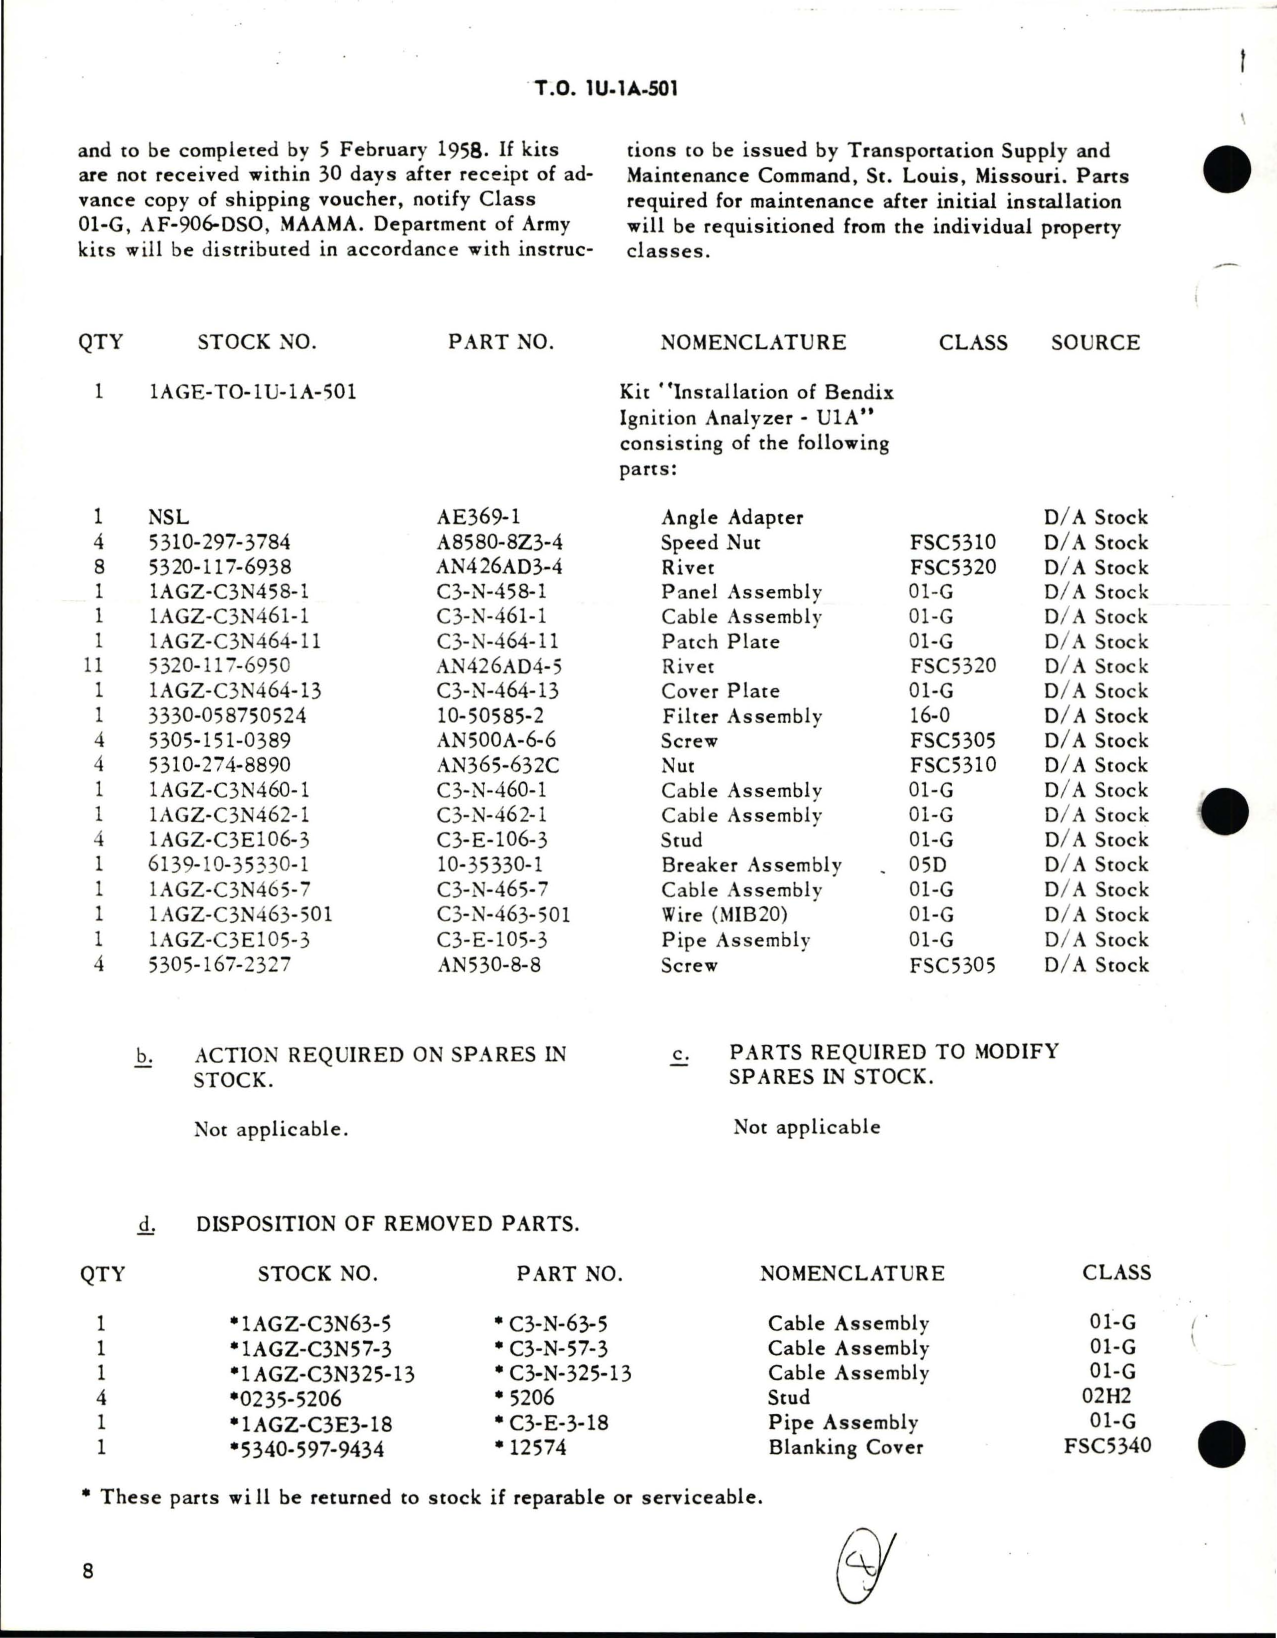 Sample page 8 from AirCorps Library document: Flight Manual for DHC-3 Otter